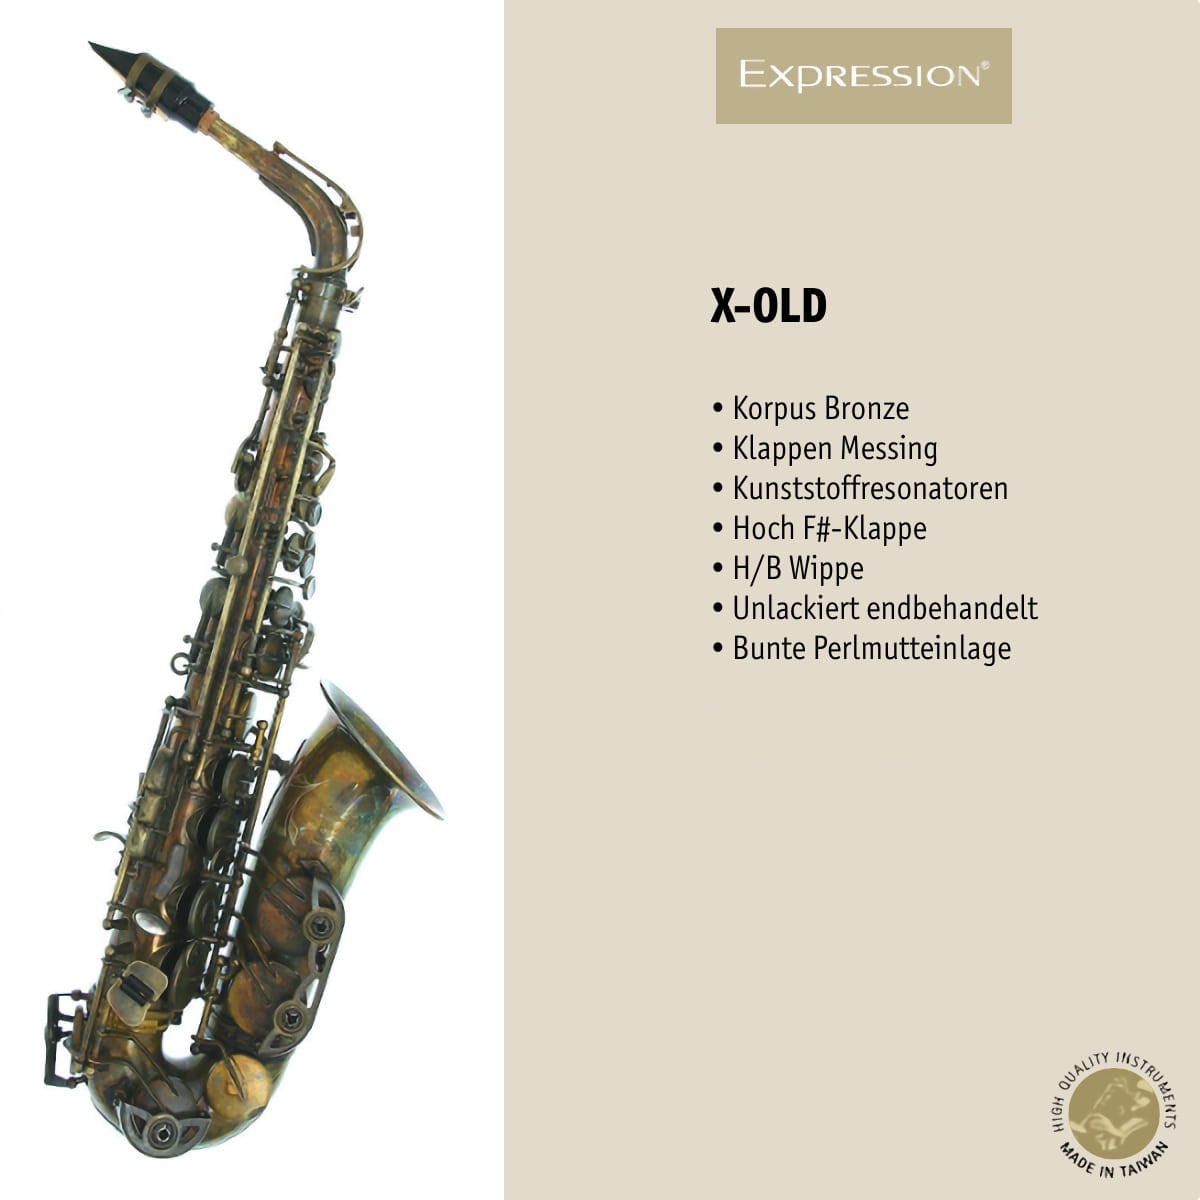 EXPRESSION Instruments X-OLD